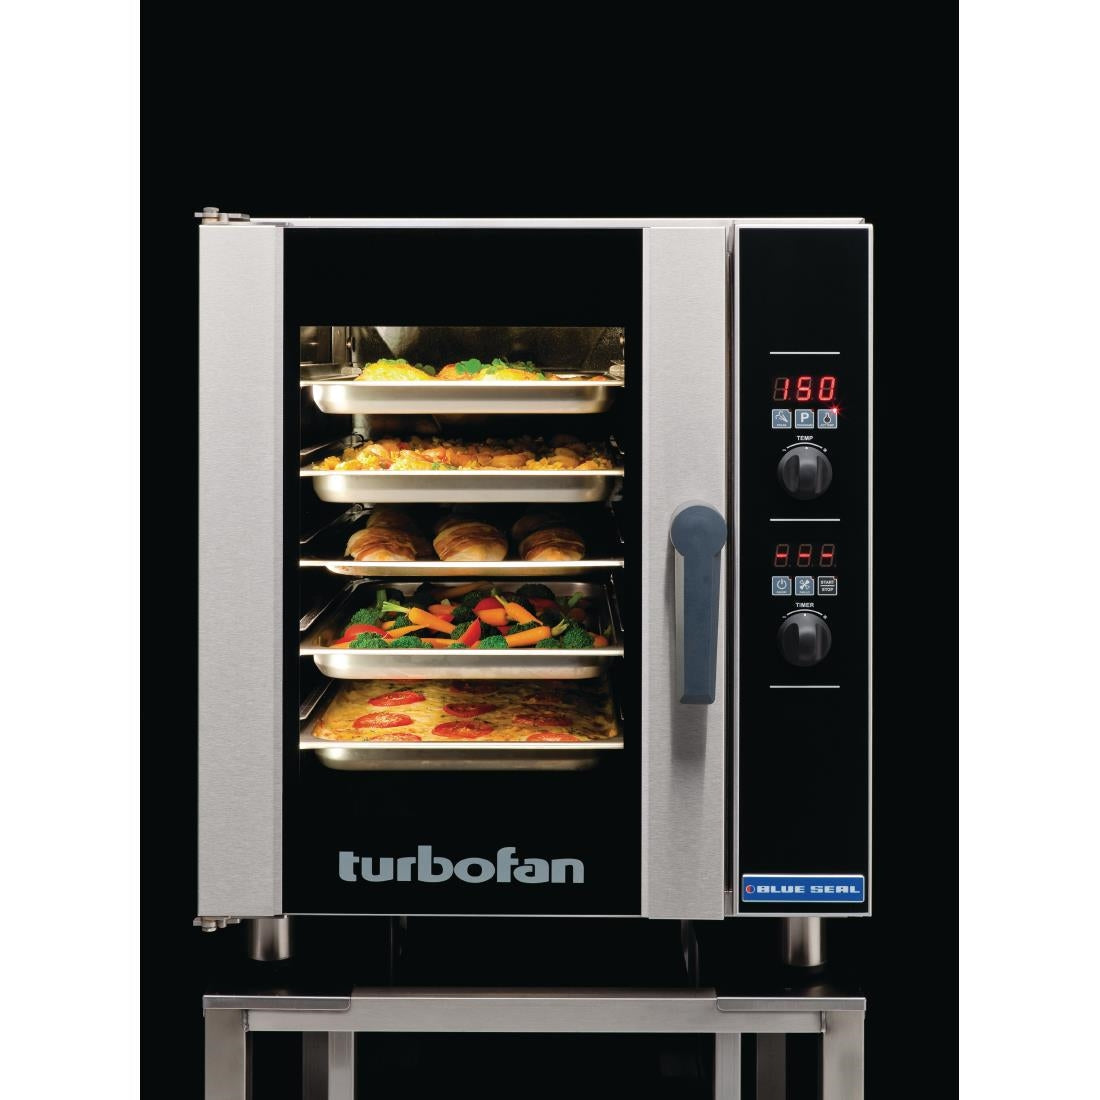 GG552 Blue Seal Turbofan Convection Oven E33D5 JD Catering Equipment Solutions Ltd